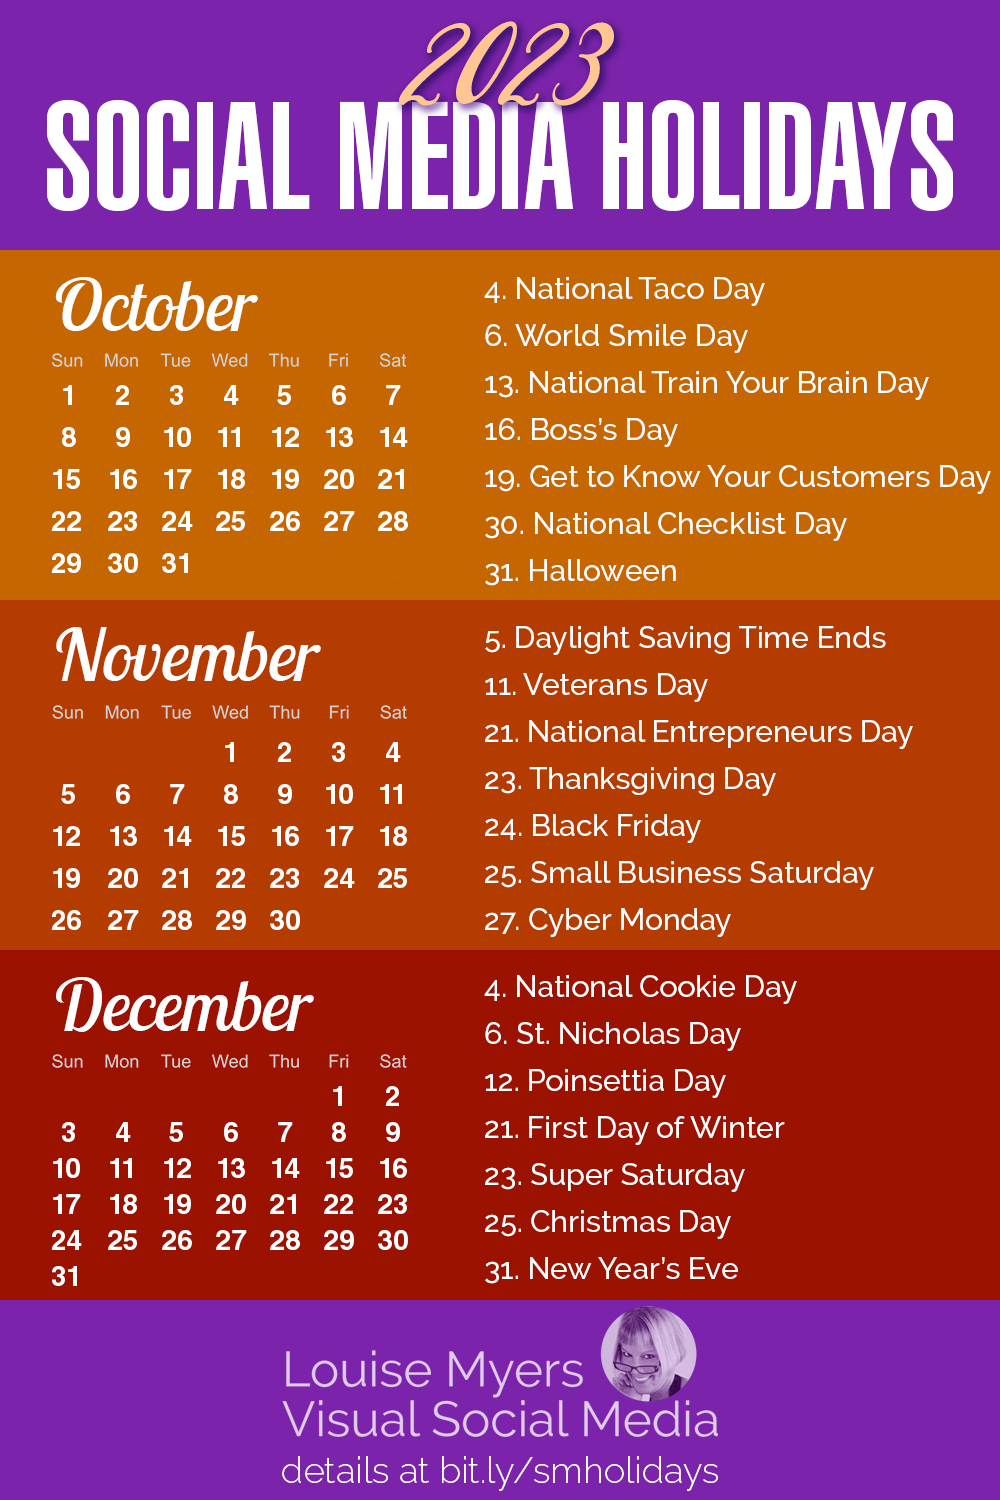 purple, pumpkin and rust colored infographic with monthly calendars for october, november and december 2023 with list of top social media holidays for these autumn months.